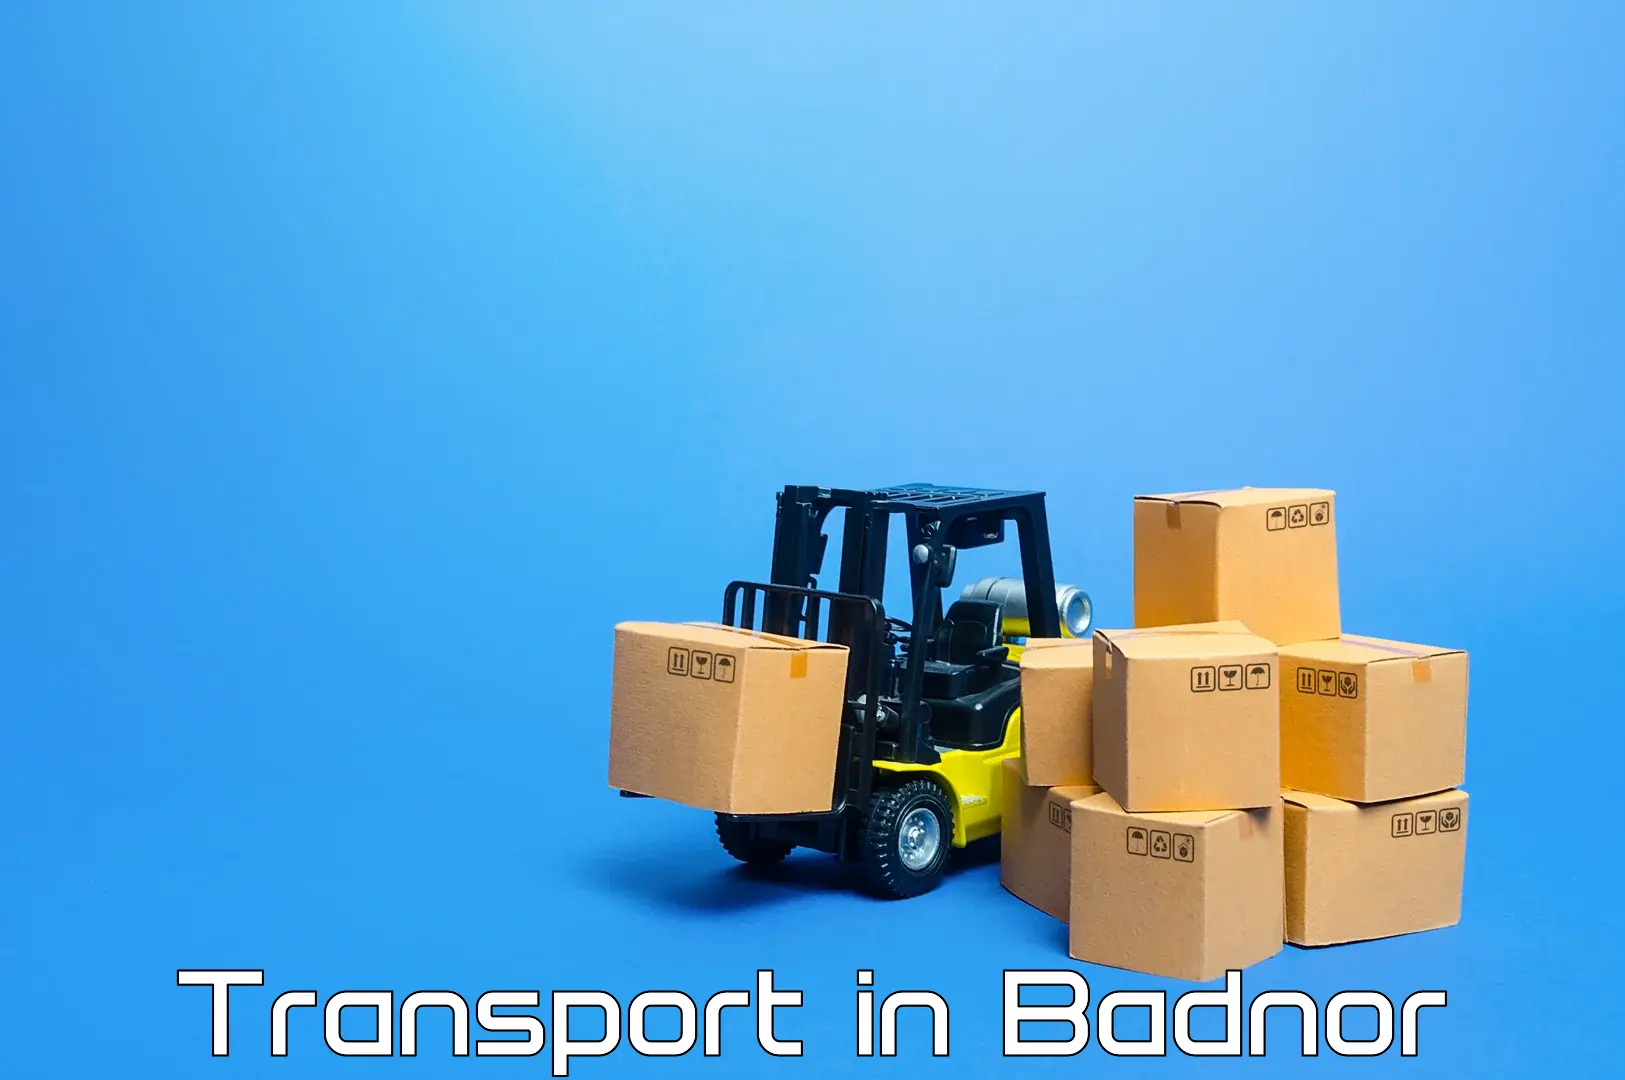 Container transportation services in Badnor